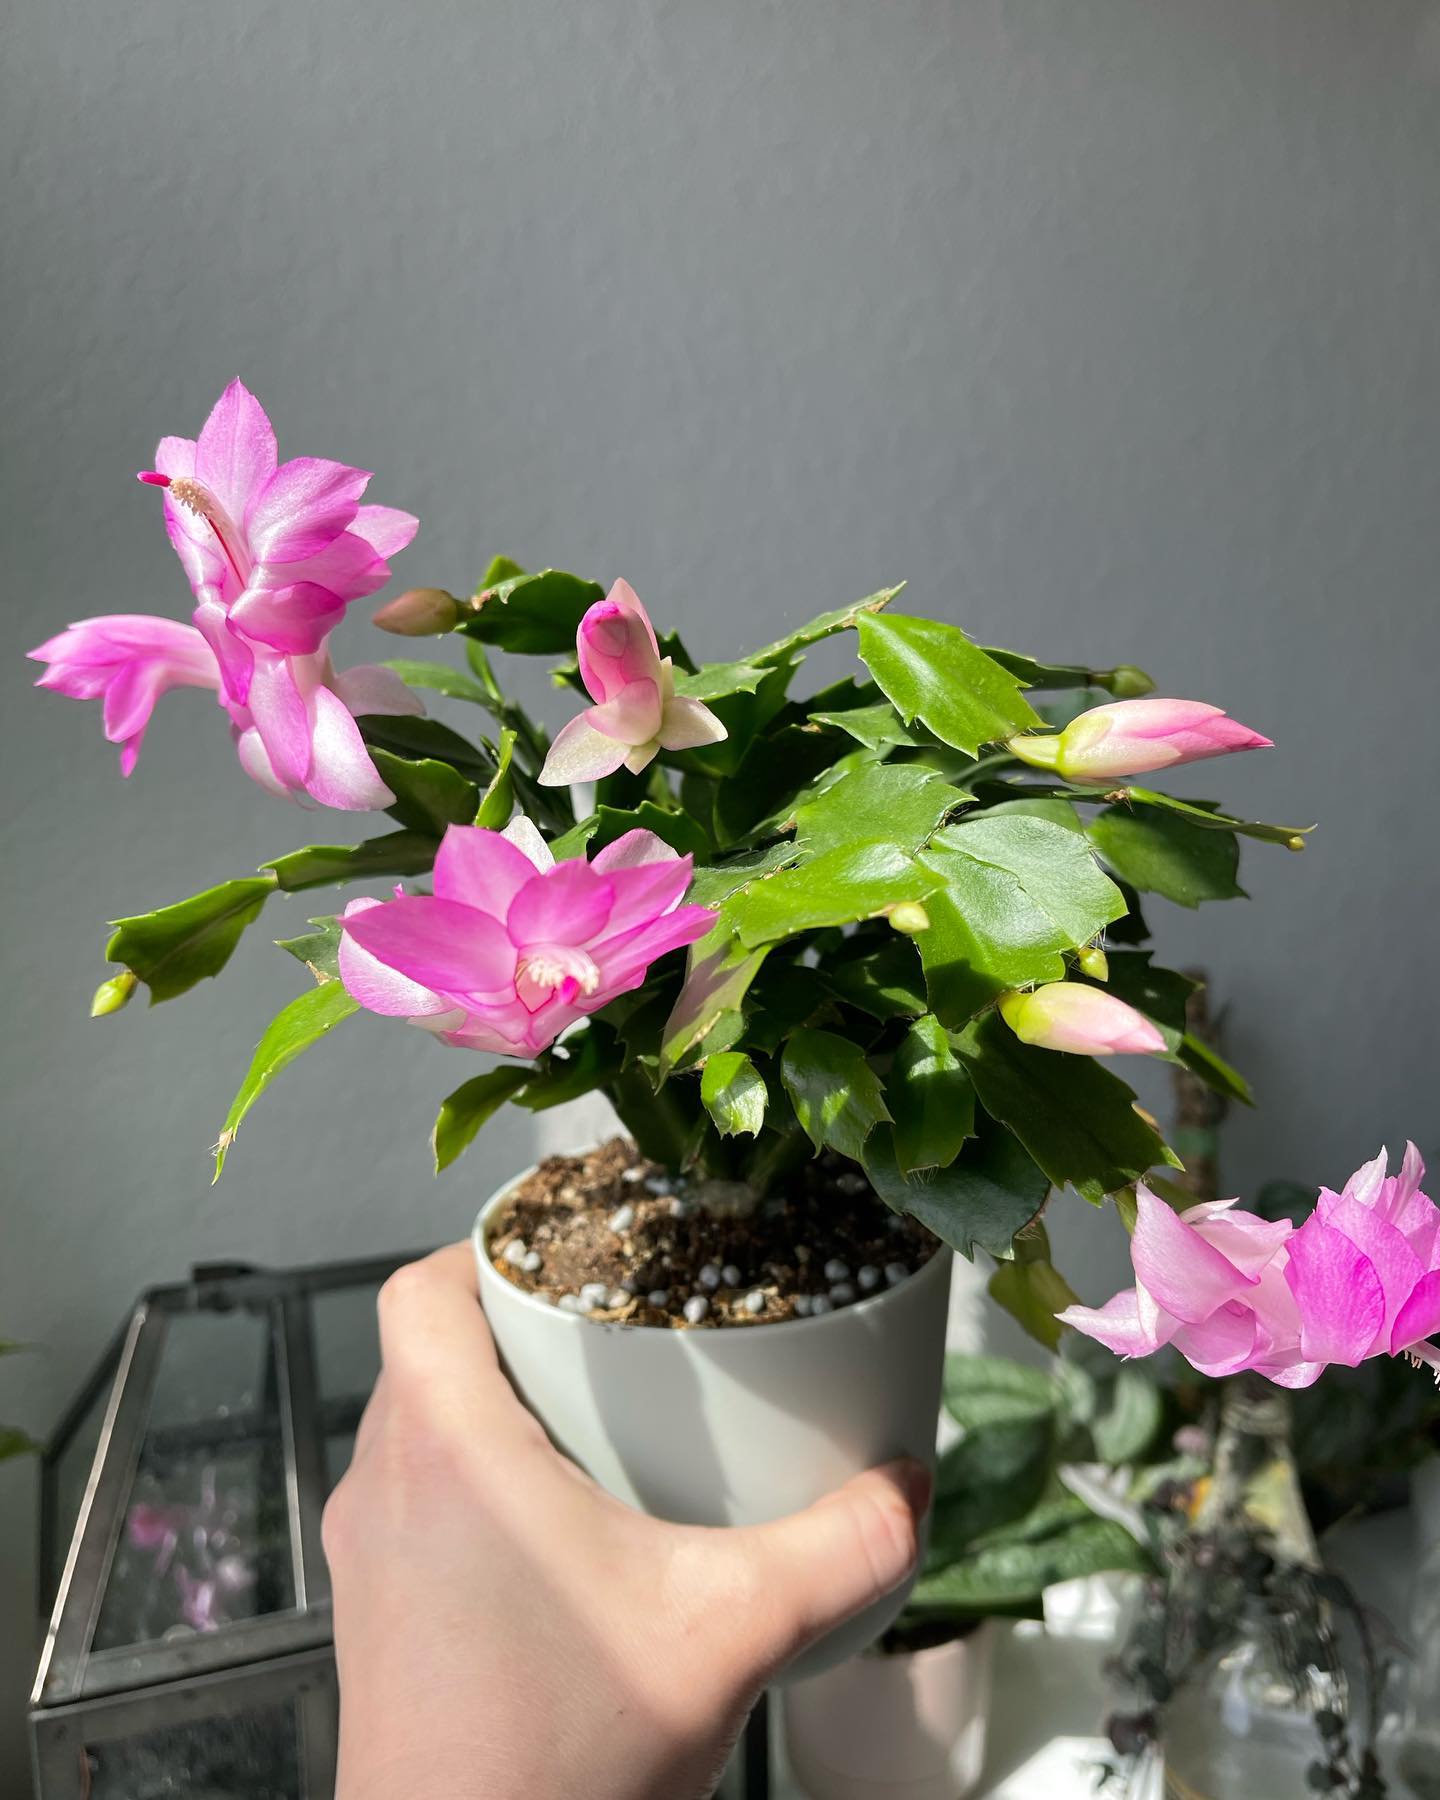 Christmas cactus blooming again with pink flowers - Why is my Christmas cactus dropping leaves?